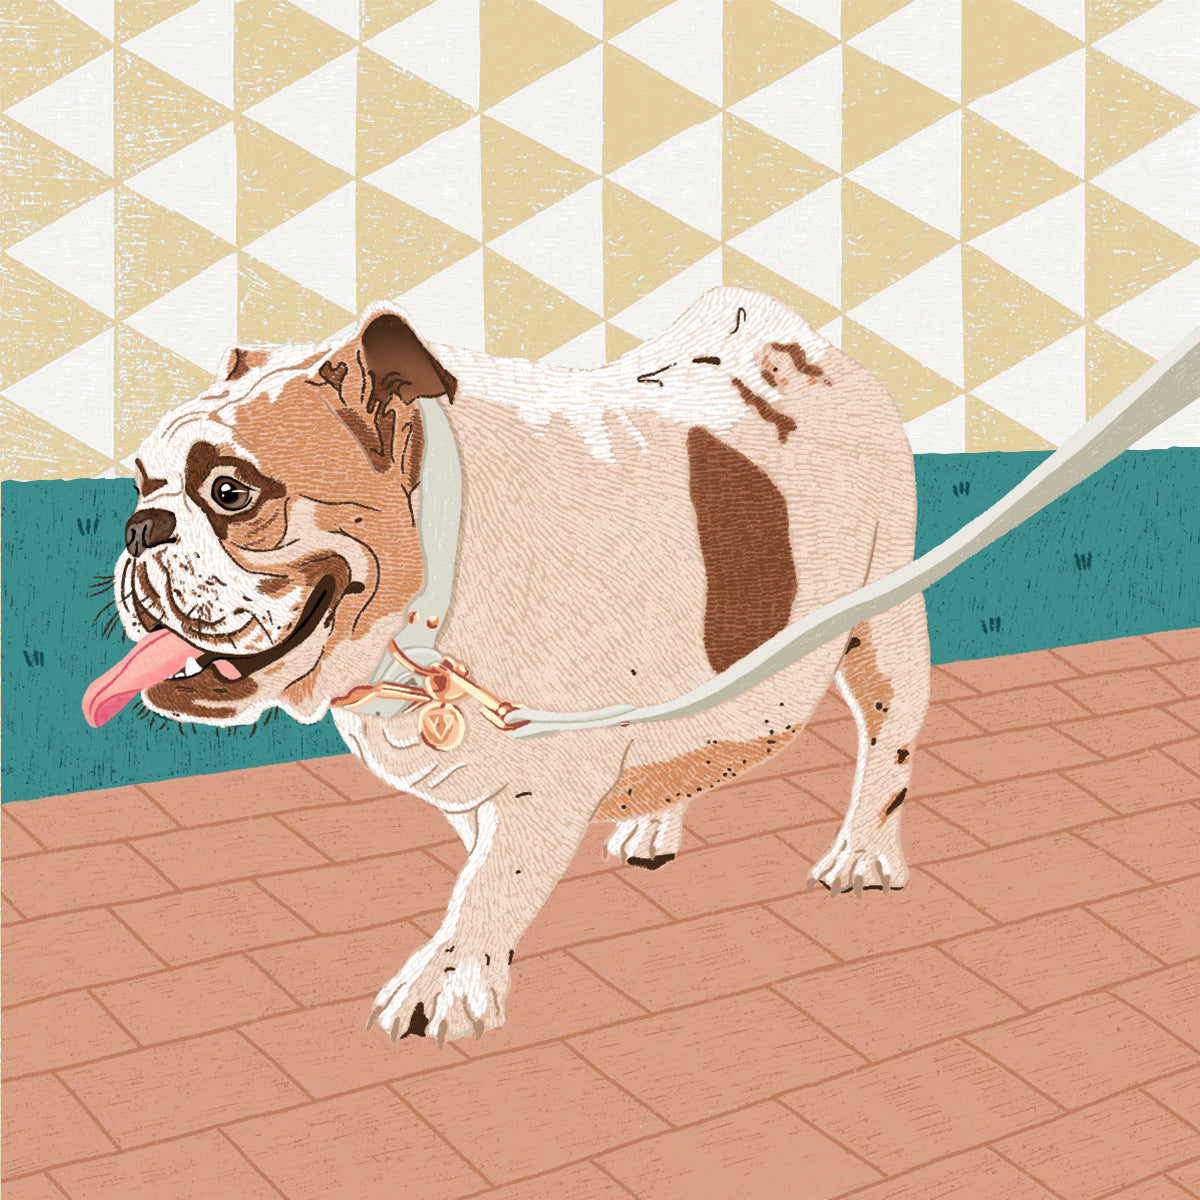 Minimalist digital art of an English Bulldog, in a Valgray for Dogs designer dog leash and collar. The art shows an excited English Bulldog walking with a luxury, tear-resistant bone grey and yellow gold dog lead and collar on a patterned background.